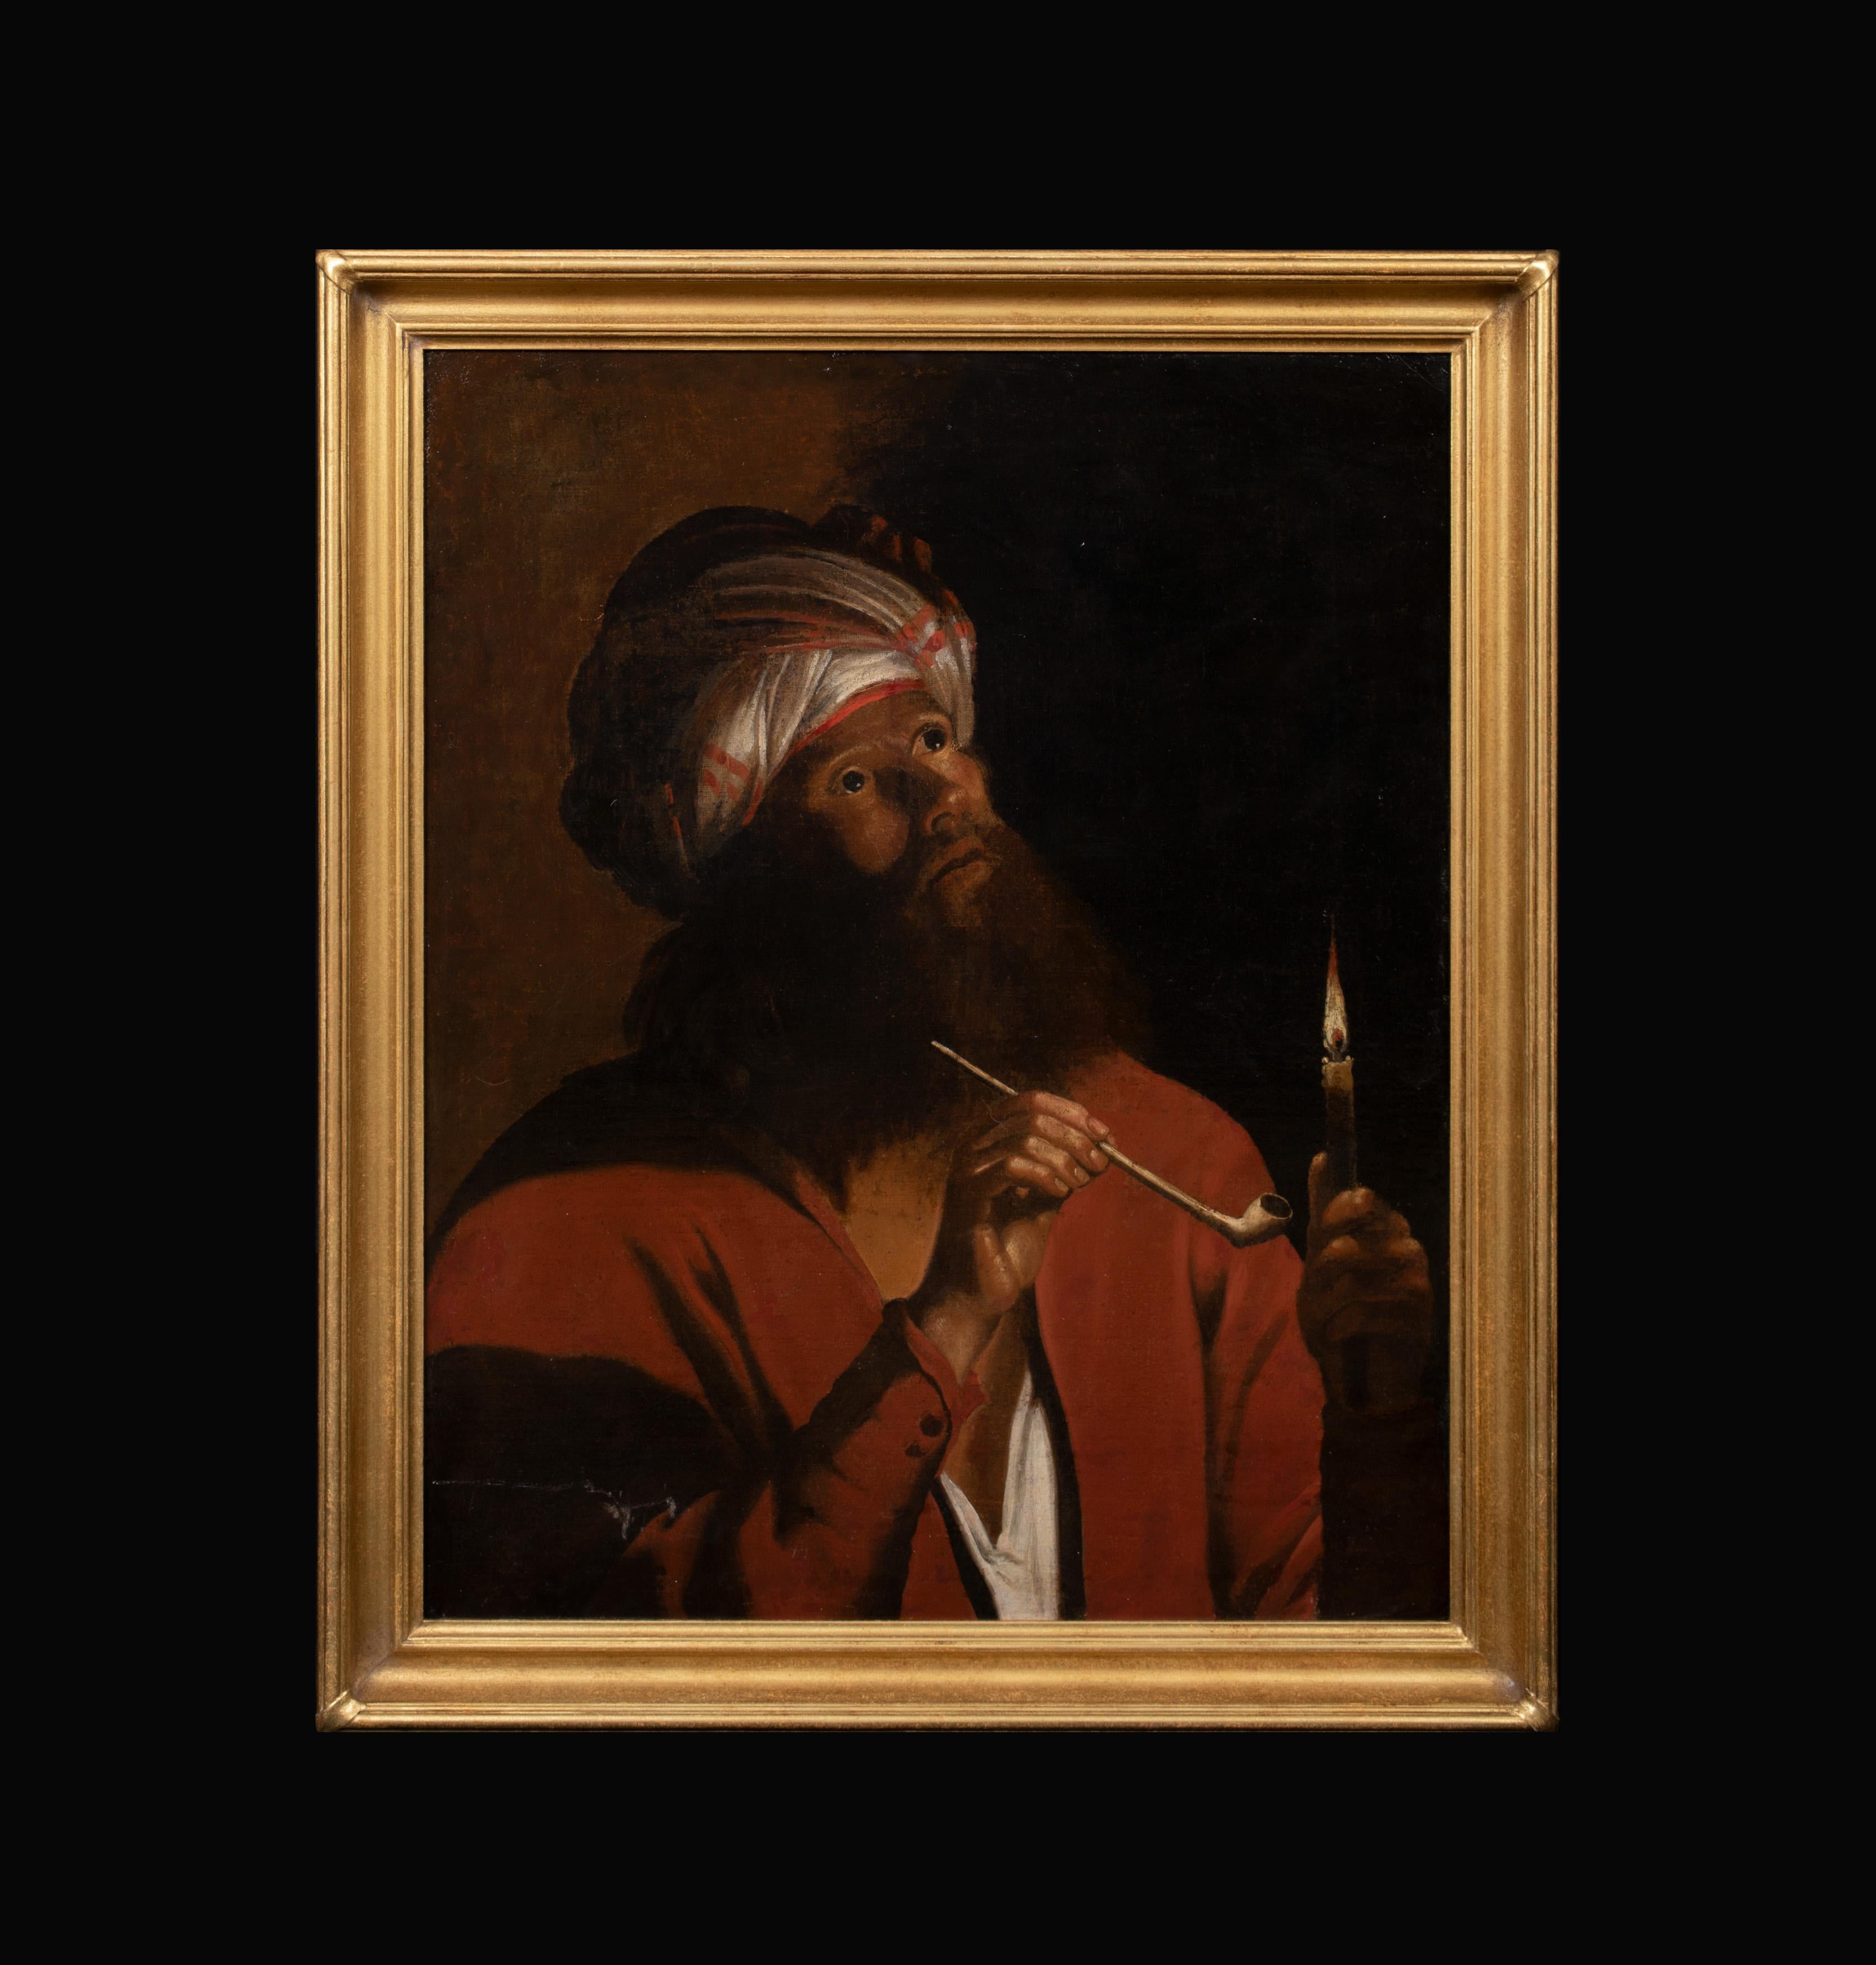 Portrait Of A Man Wearing An Arab Turkish Man Smoking a Pipe, 17th Century   - Painting by Adam De Coster